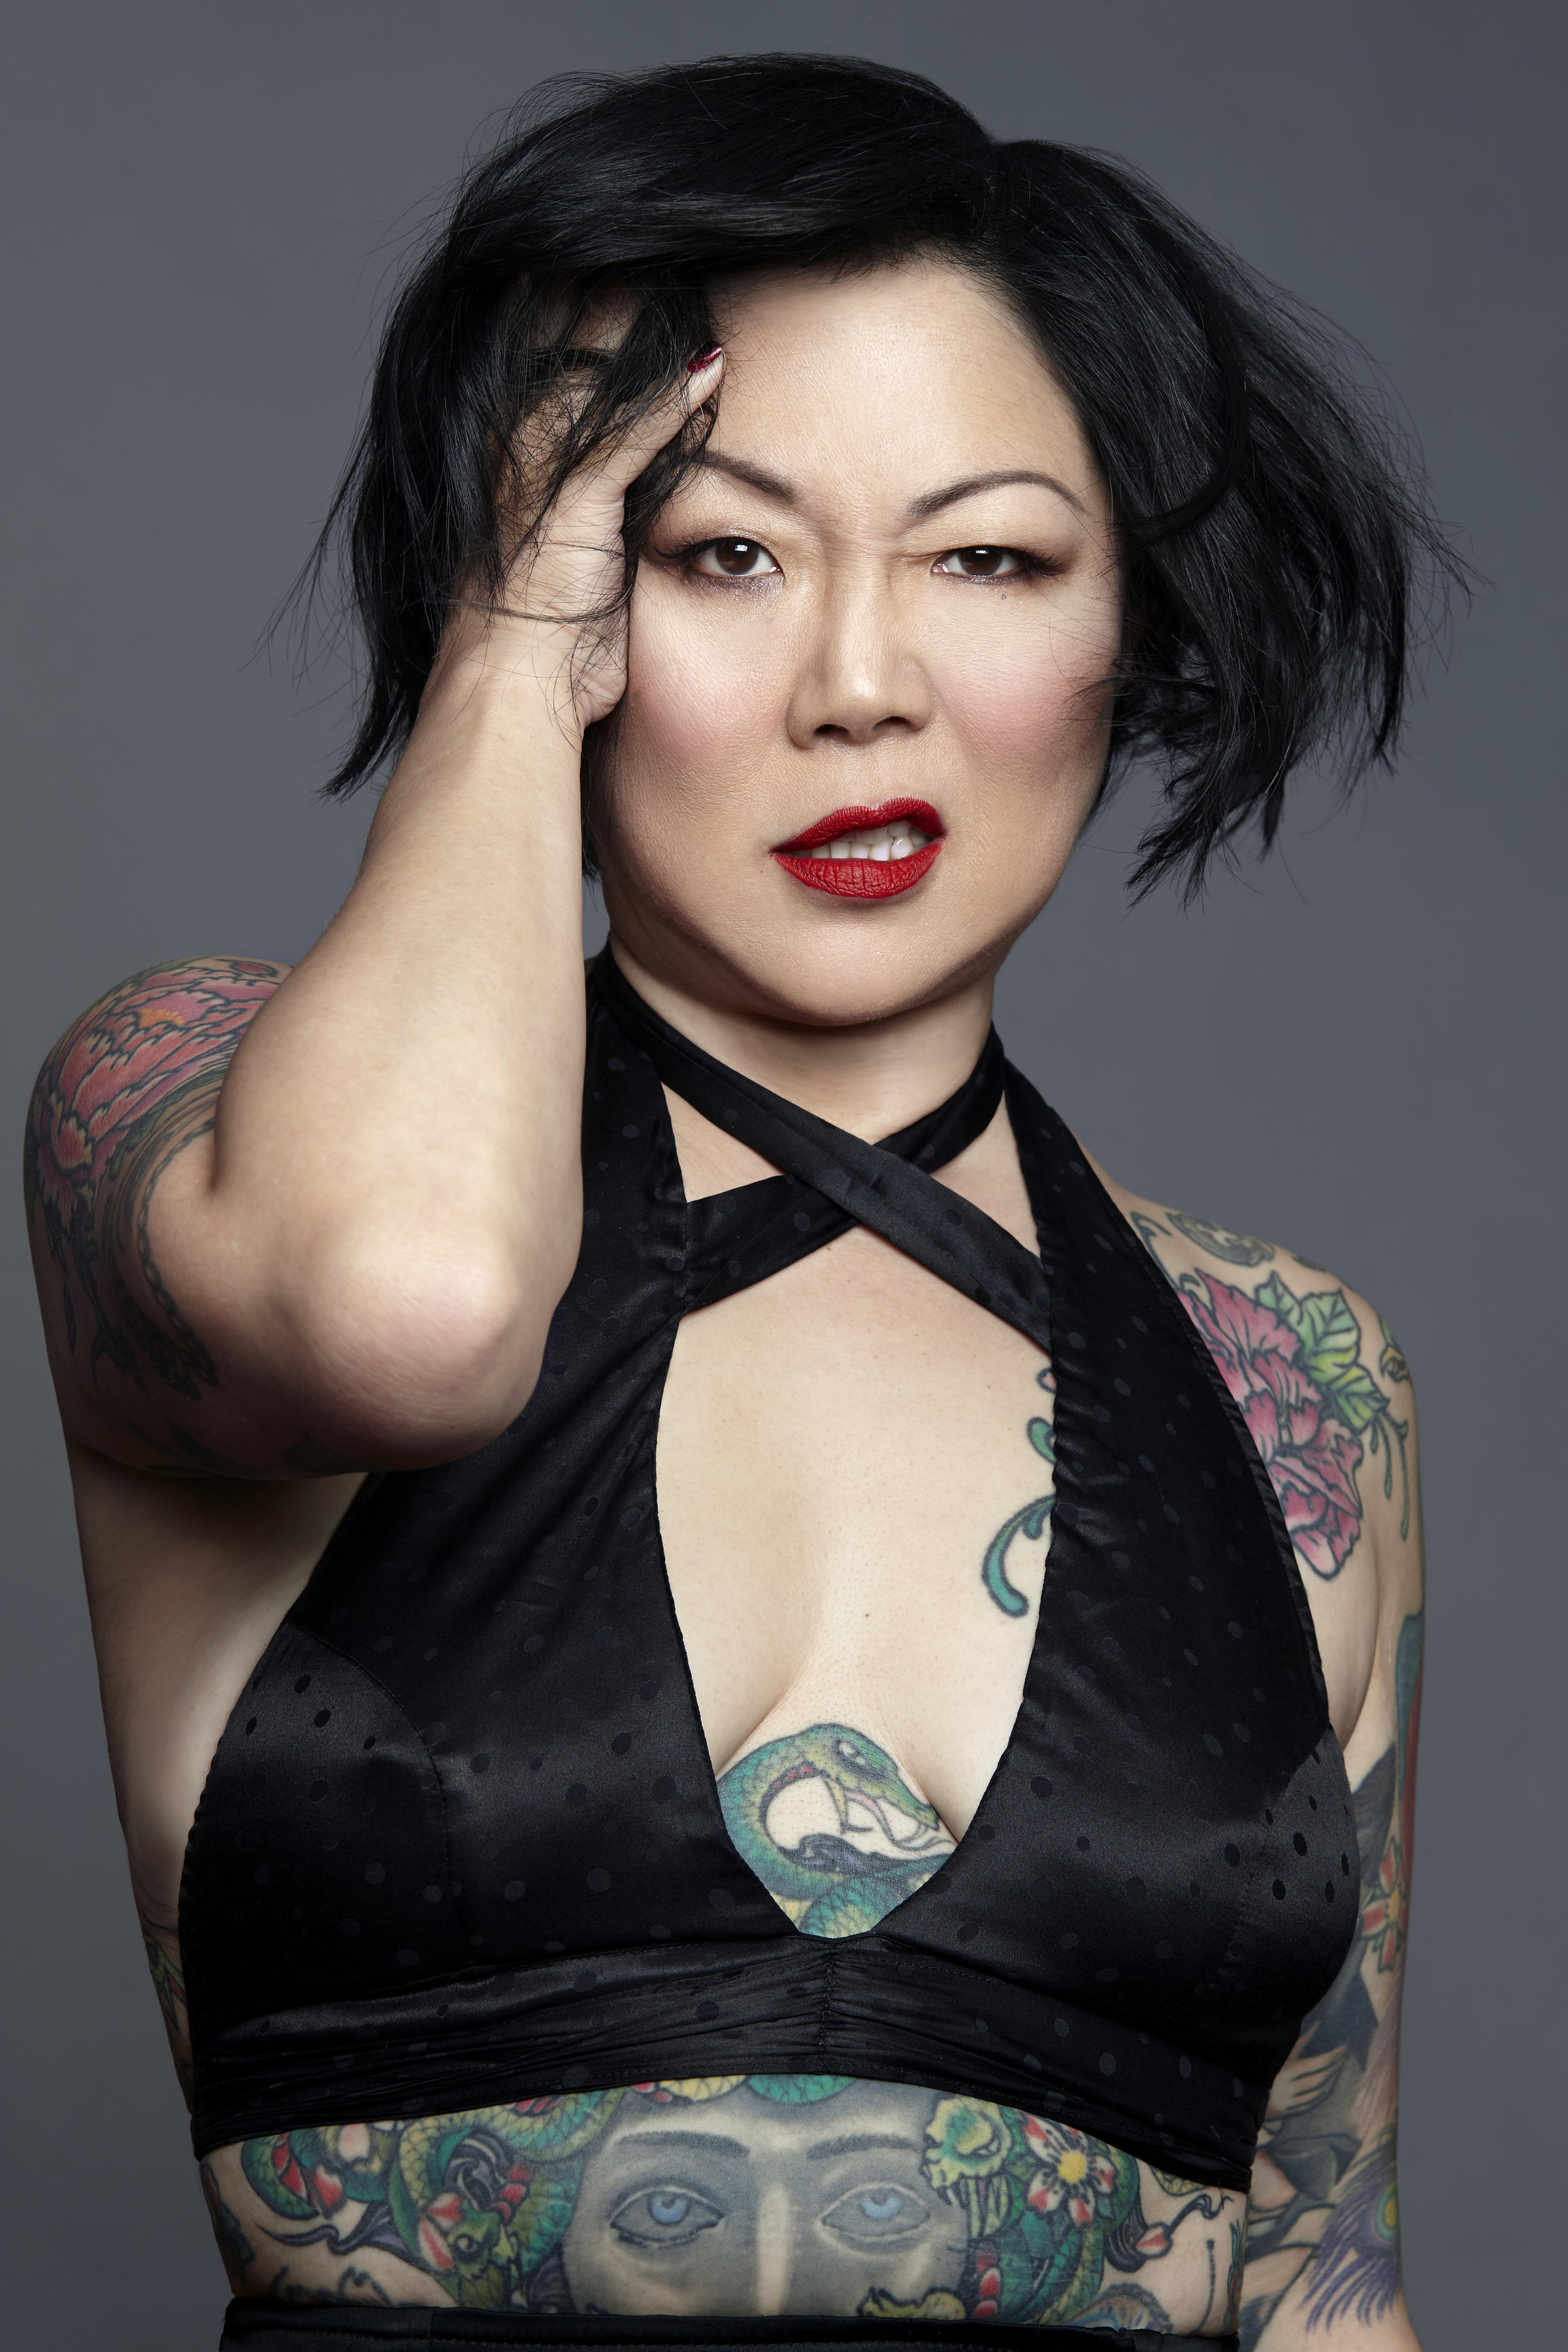 Margaret Cho Top Must Watch Movies of All Time Online 